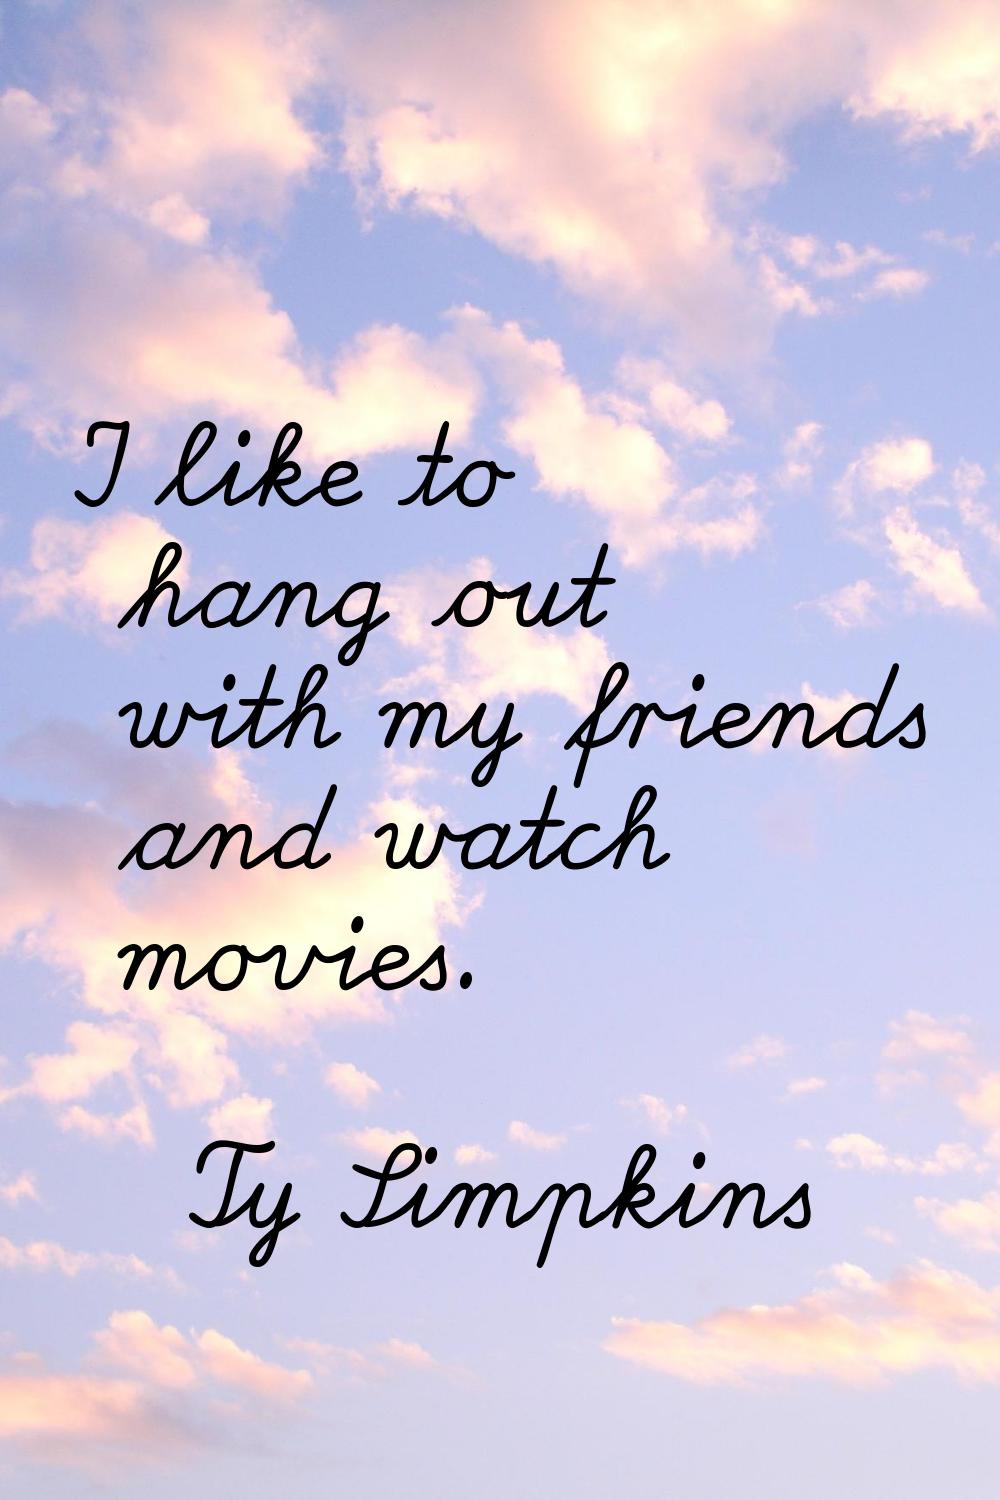 I like to hang out with my friends and watch movies.